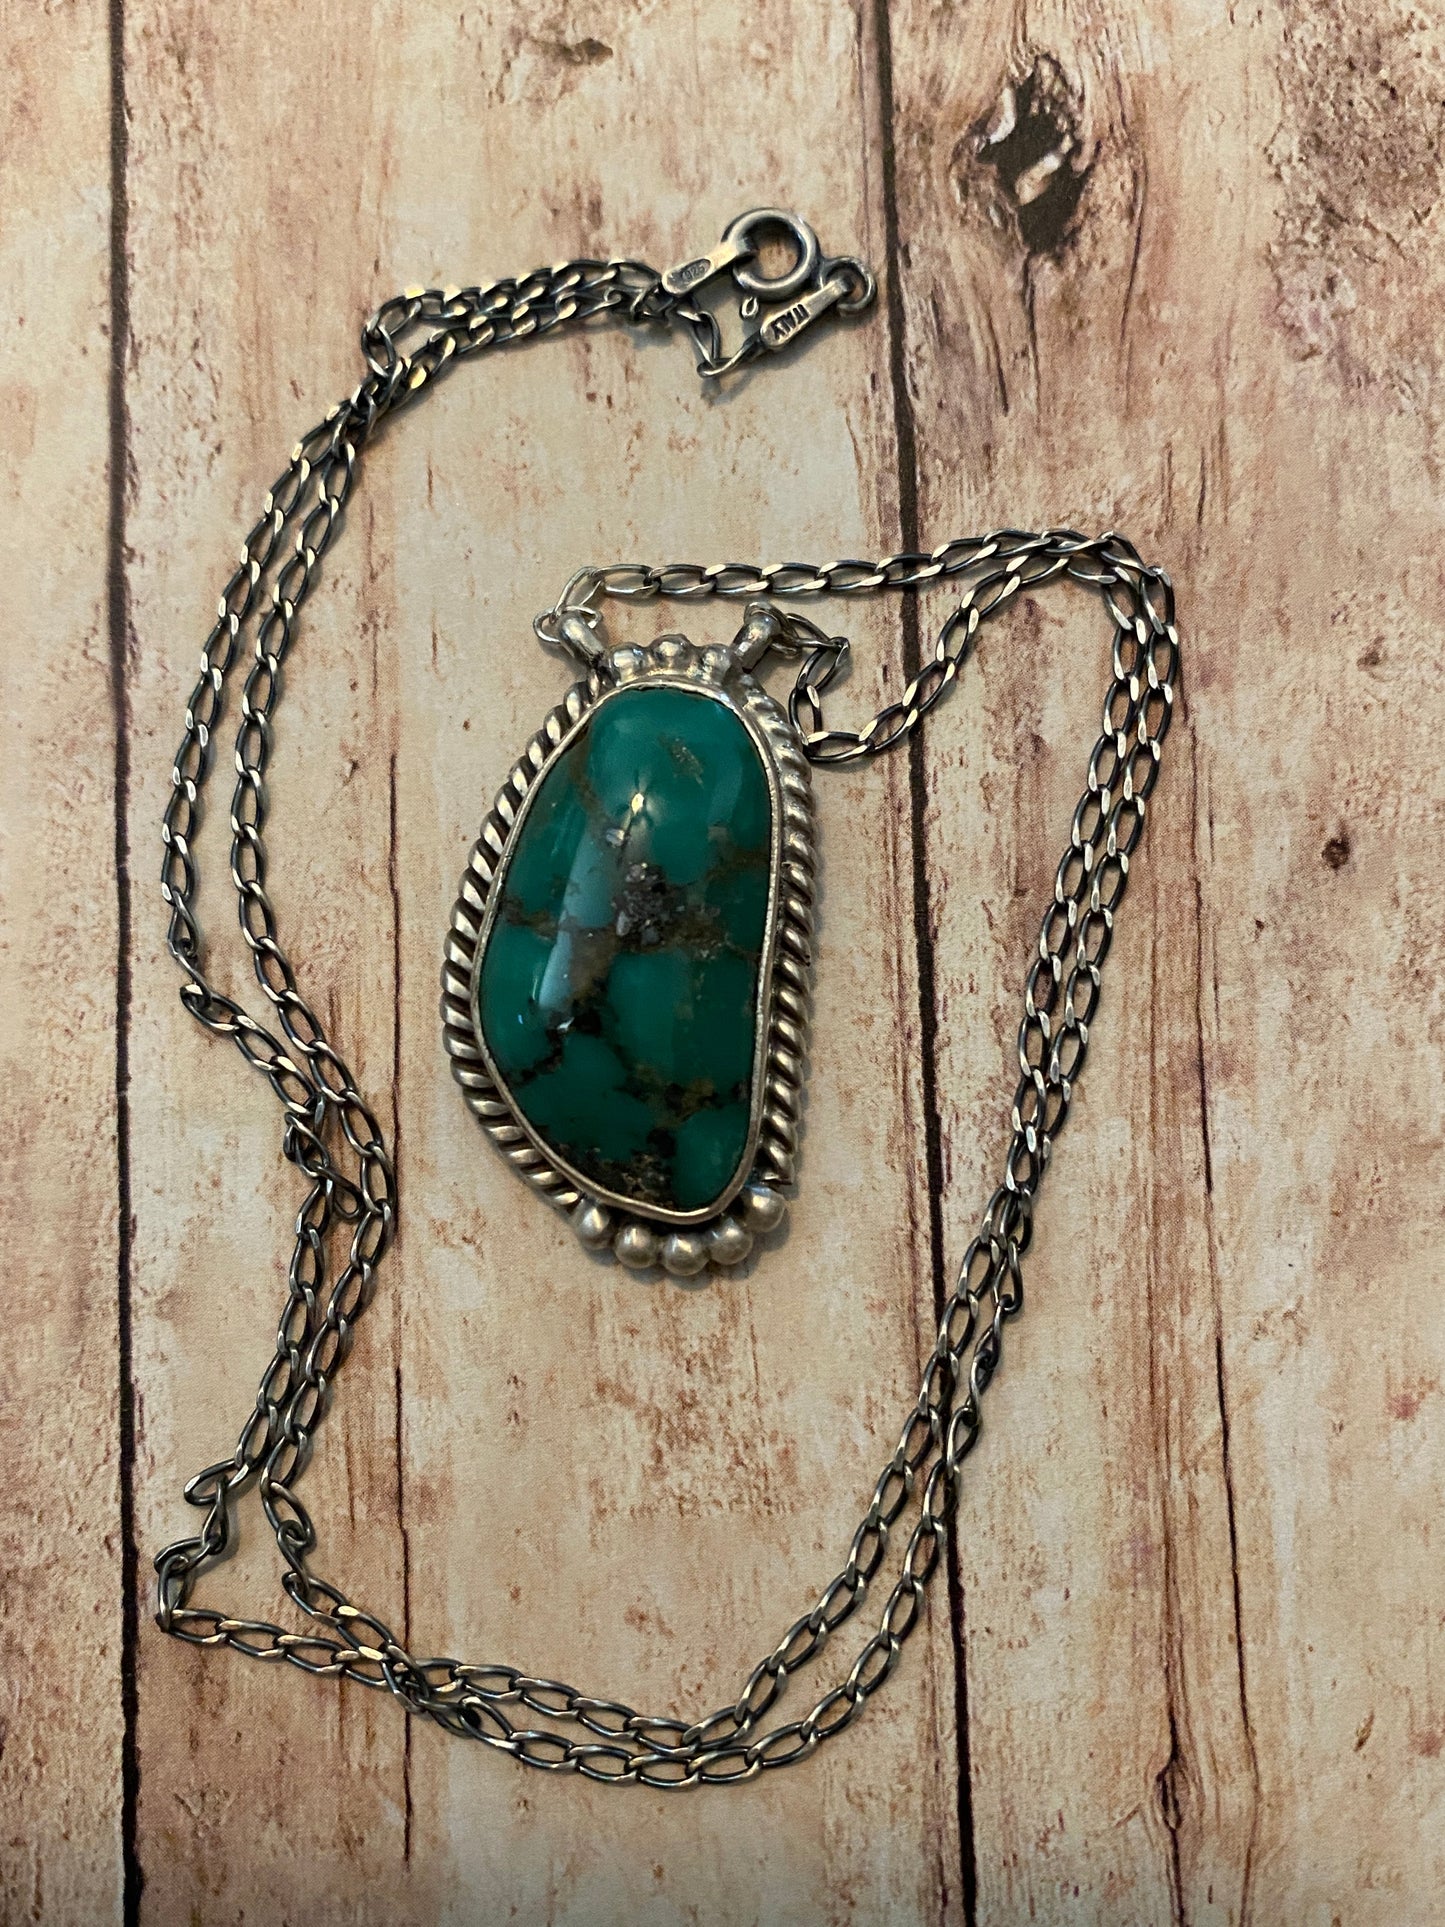 Navajo Sterling Silver And Turquoise Stone Southwest Necklace Signed